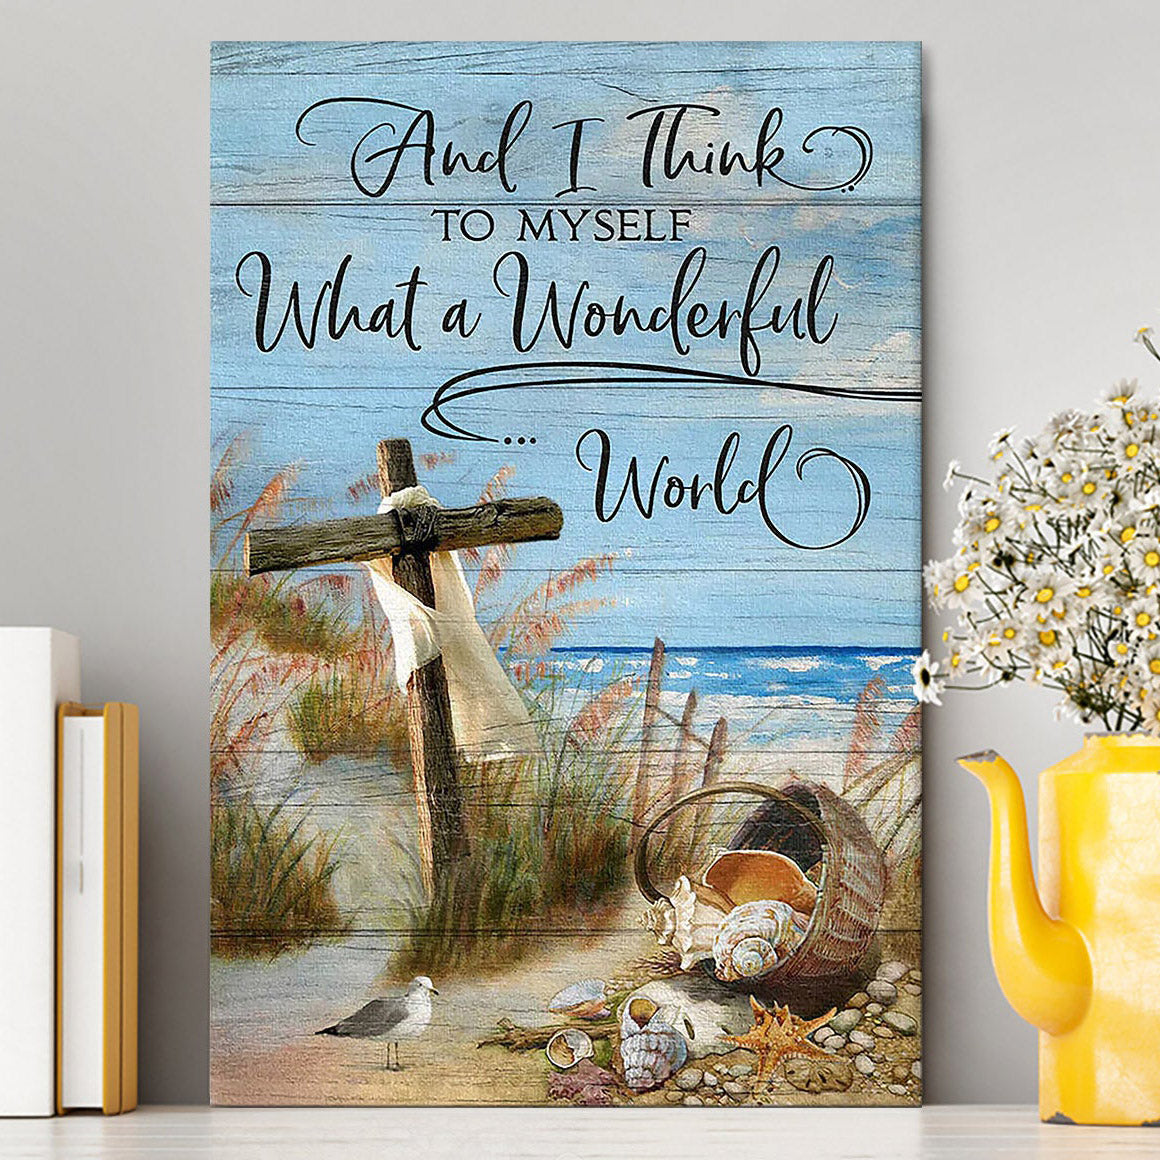 Wooden Cross And I Think To Myself What A Wonderful World Canvas Art - Christian Art - Bible Verse Wall Art - Religious Home Decor